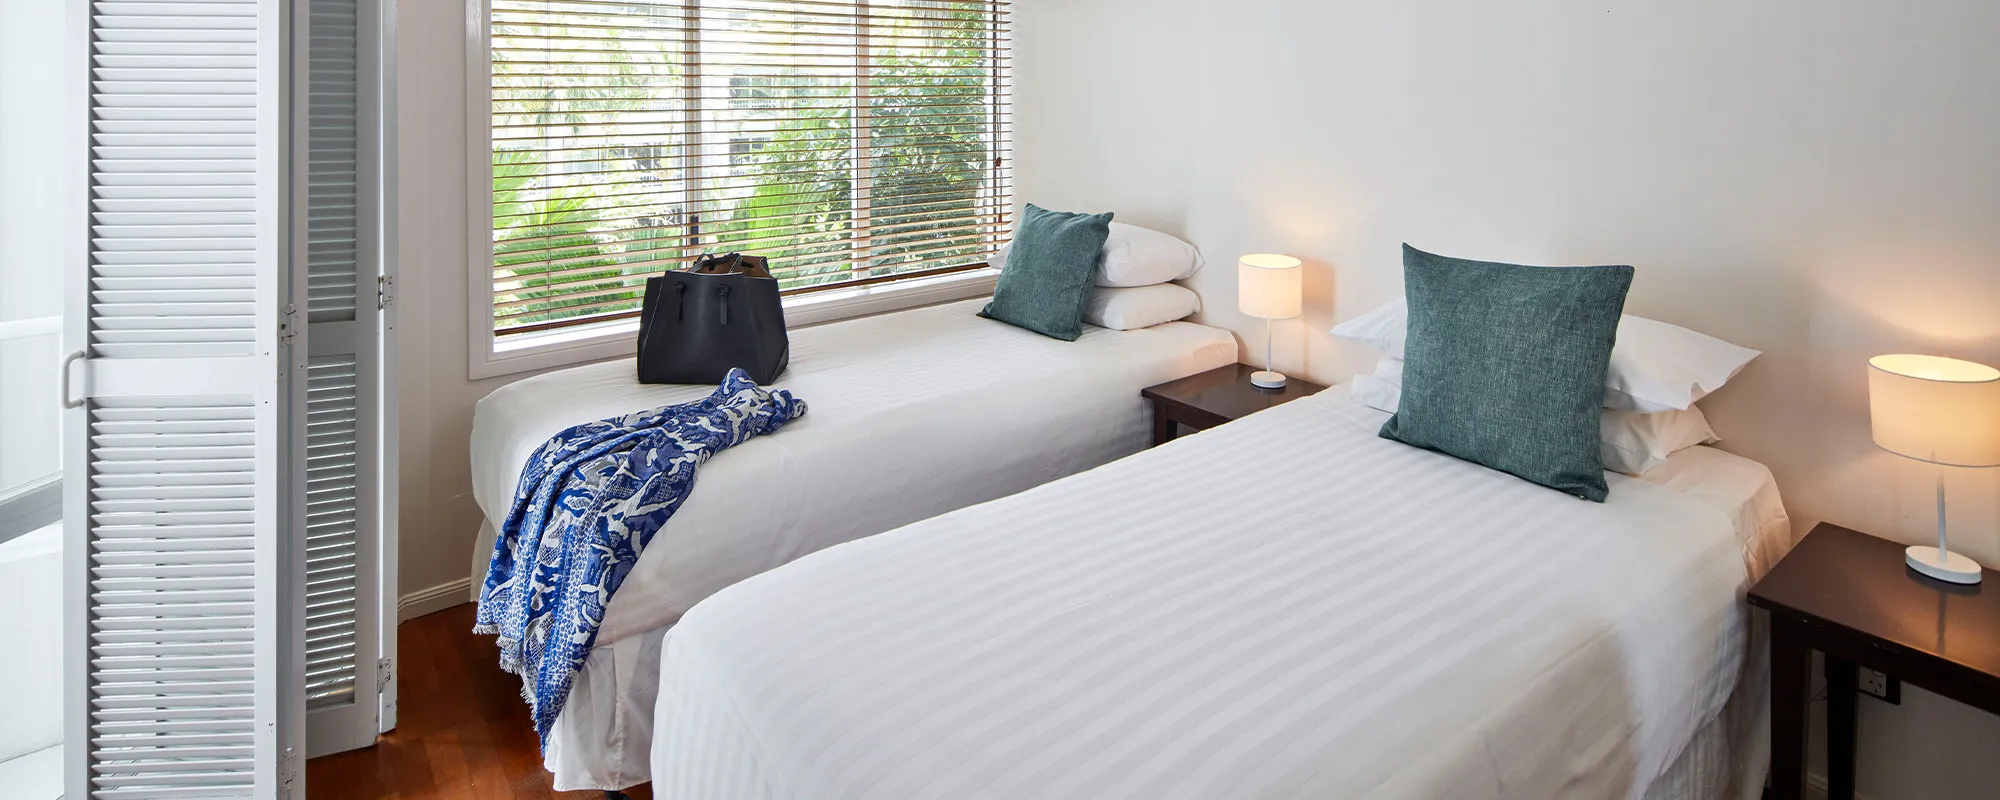 Alamanda Palm Cove by Lancemore Boutique Luxury Accommodation Two Bedroom Apartment 2000 x 800